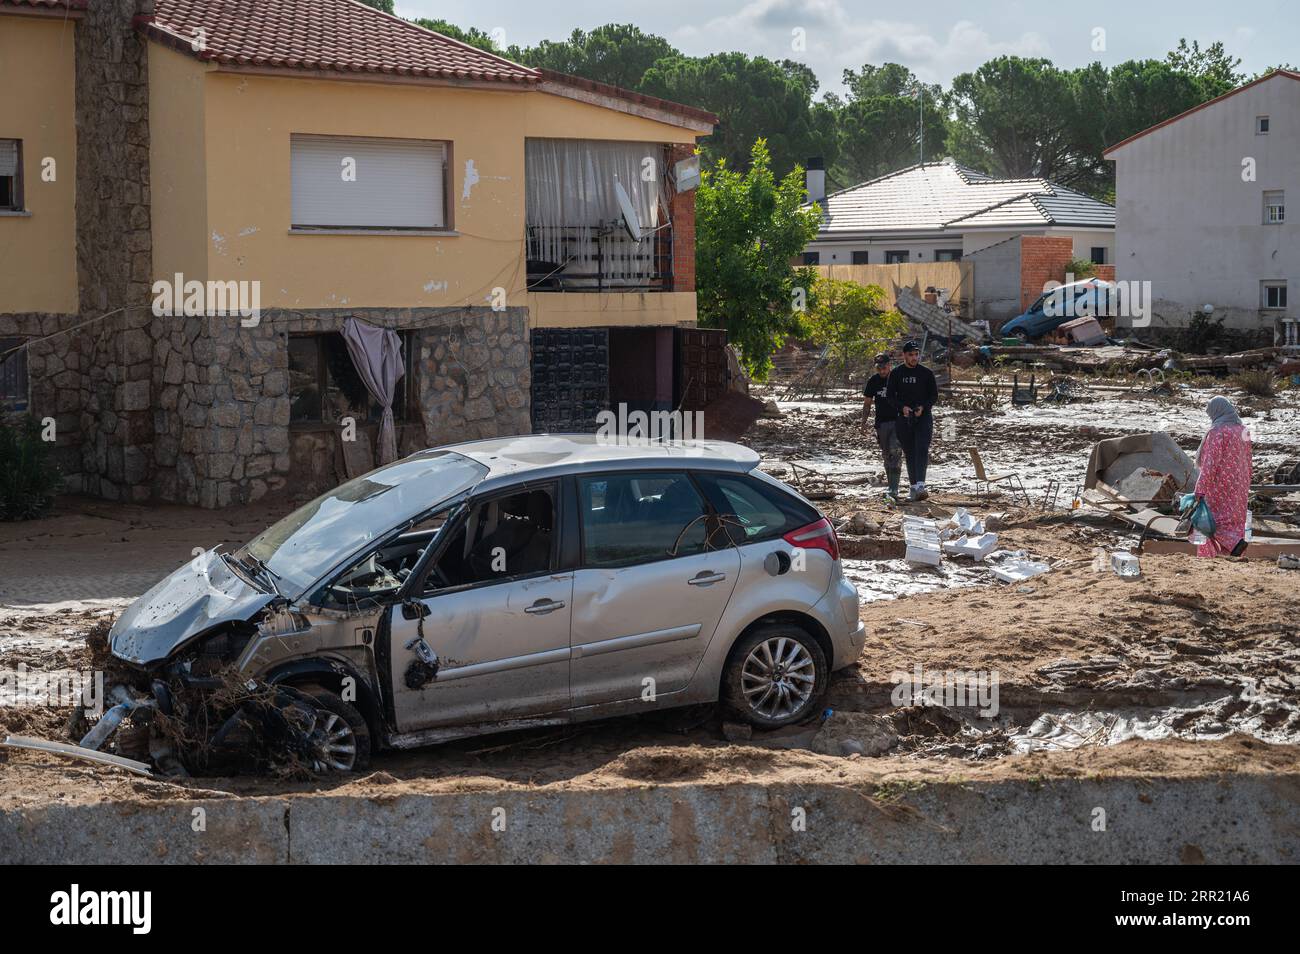 Madrid, Spain. 06th Sep, 2023. View of an affected area by floodwaters. The town of El Alamo, near Madrid, received heavy rains during September 3rd that caused floods as some rivers overflowed. Cleaning and rehabilitation work is being carried out in the affected areas. Credit: Marcos del Mazo/Alamy Live News Stock Photo